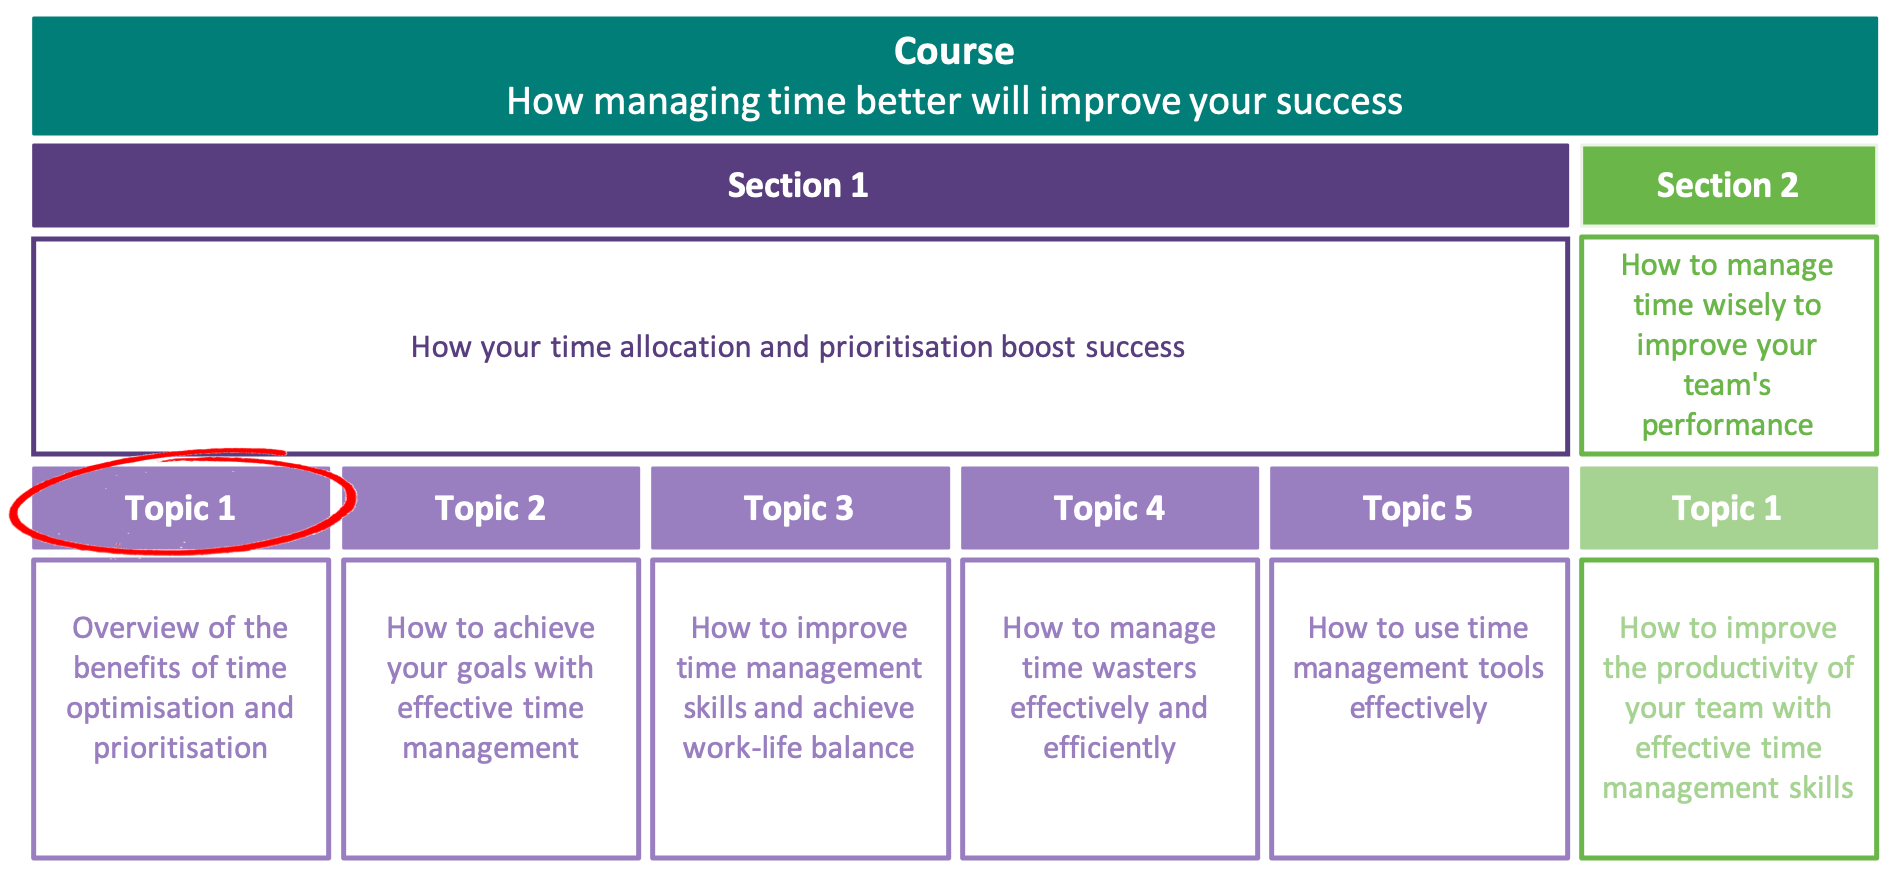 Overview of the benefits of time optimisation and prioritisation